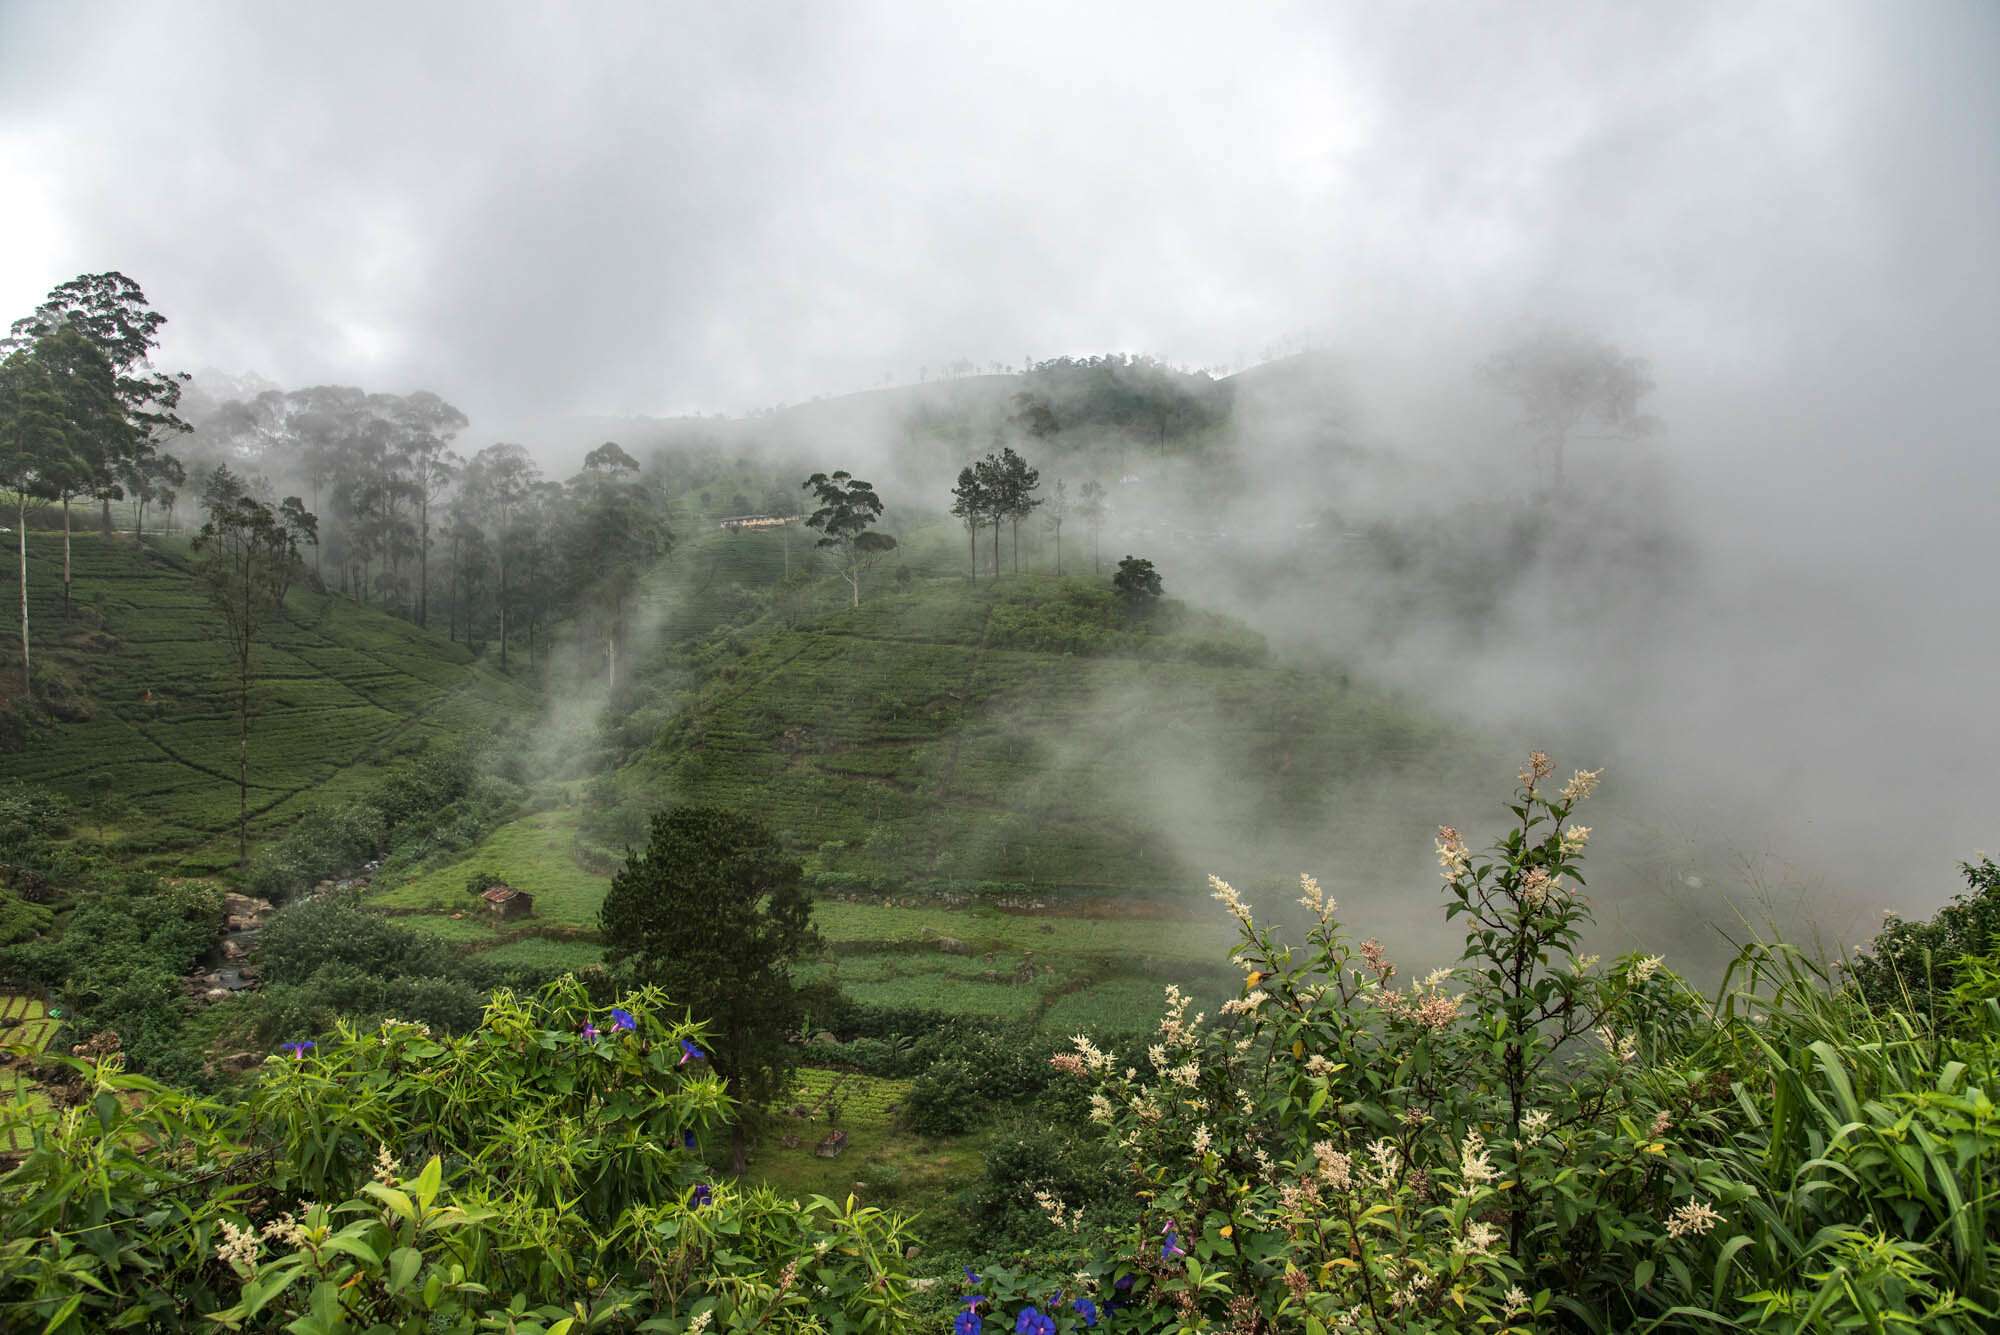 Tucked away in the misty hills of Sri Lanka’s central highlands lies a picturesque town that captivates visitors with its scenic beauty, colonial charm, and cool climate—Nuwara Eliya. Known as “Little England,”